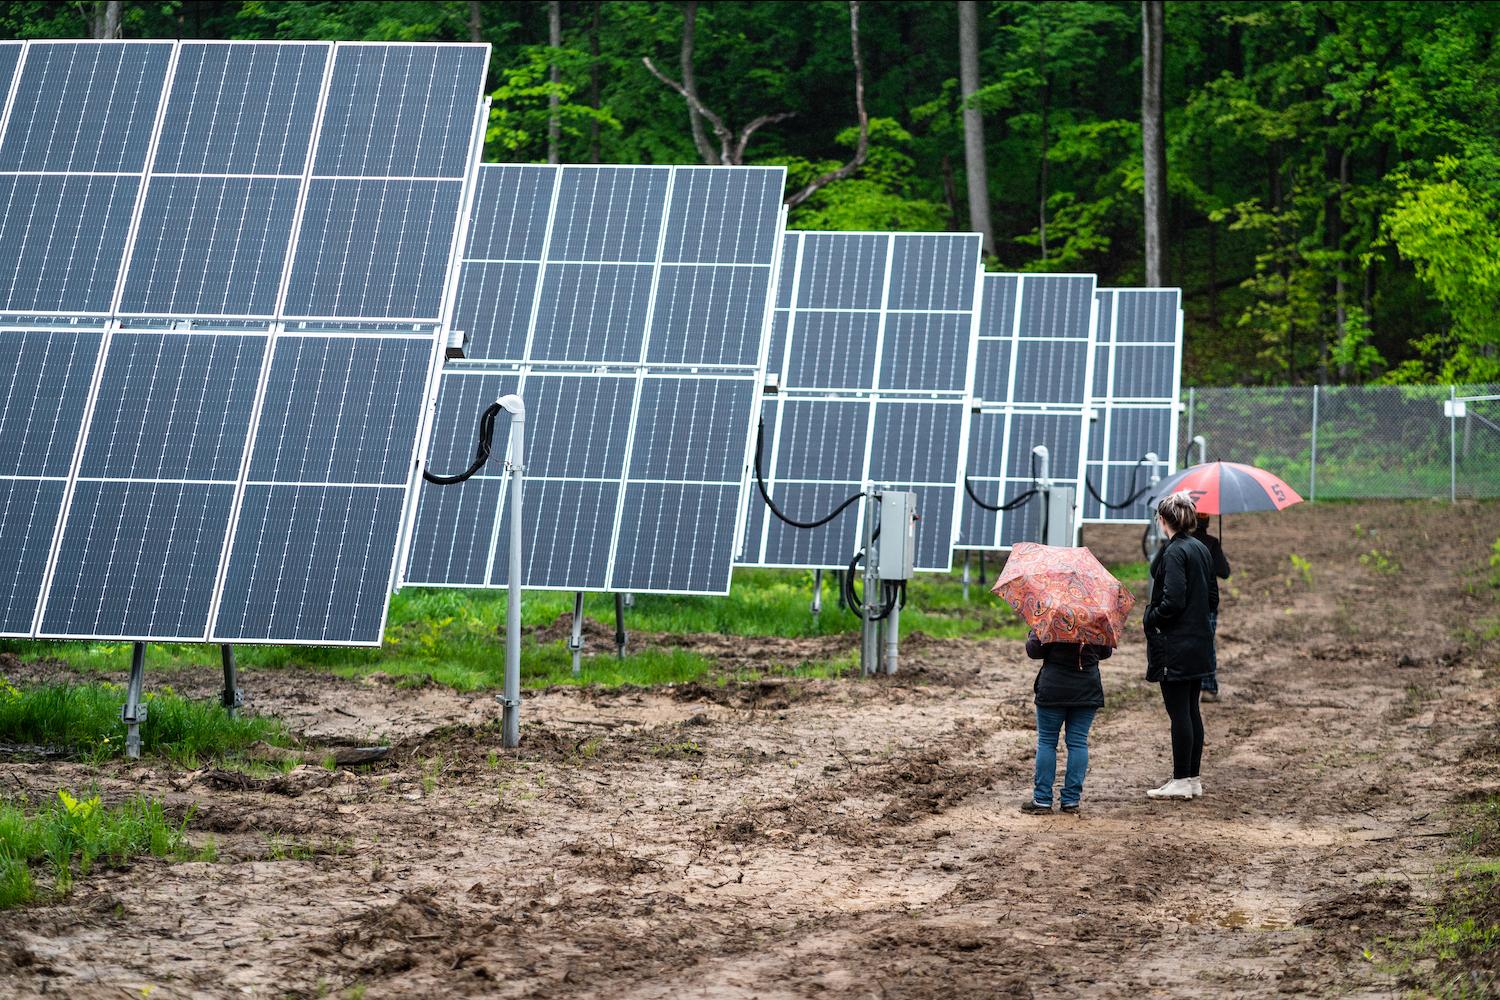 People stand next to a row of solar panels at Lightstar Renewables' project in Saugerties, New York.